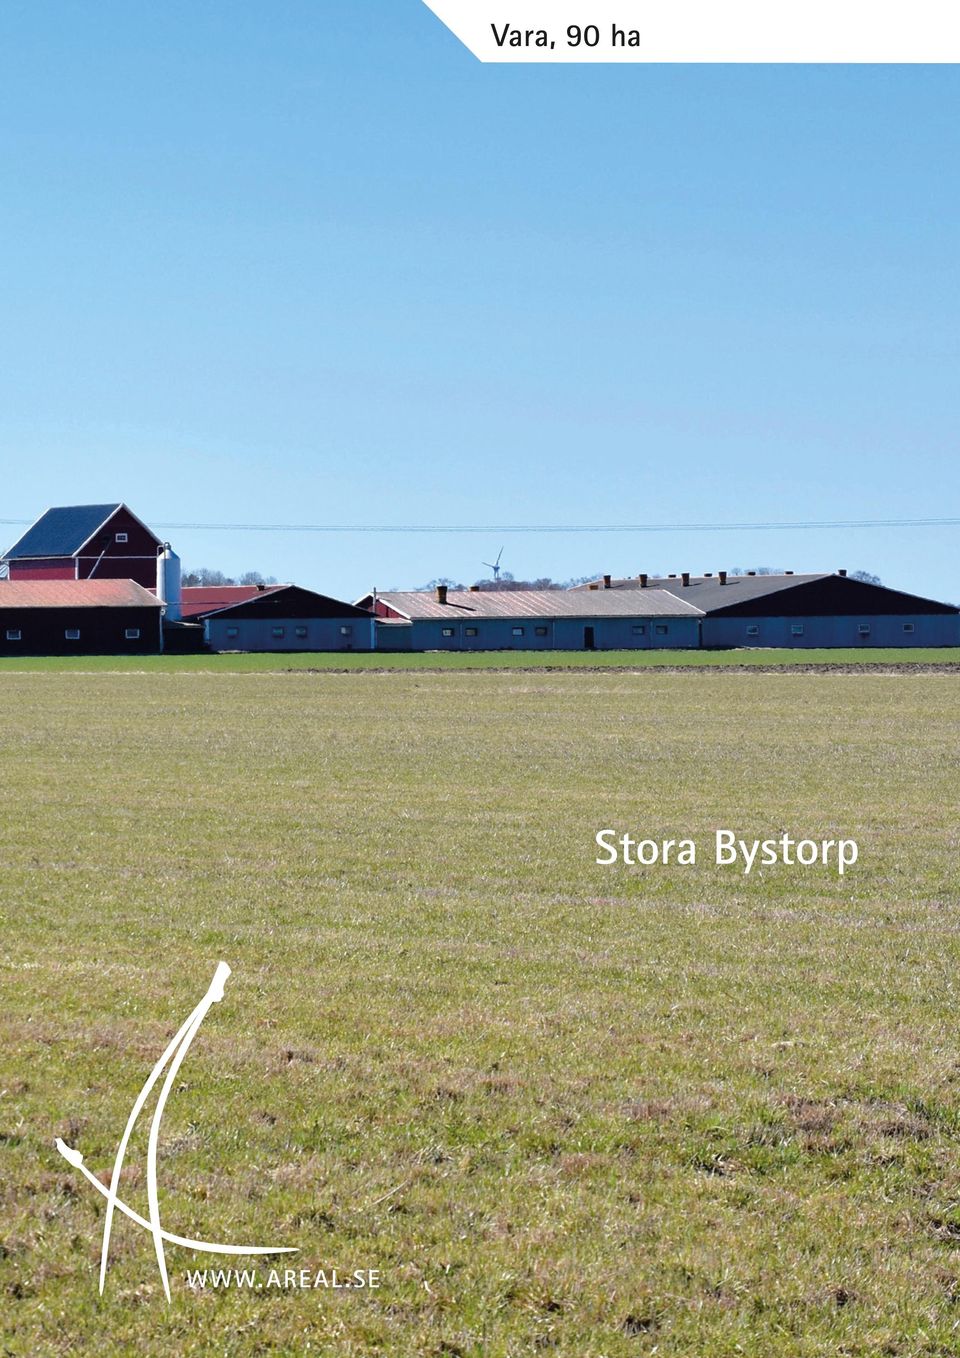 Bystorp 1